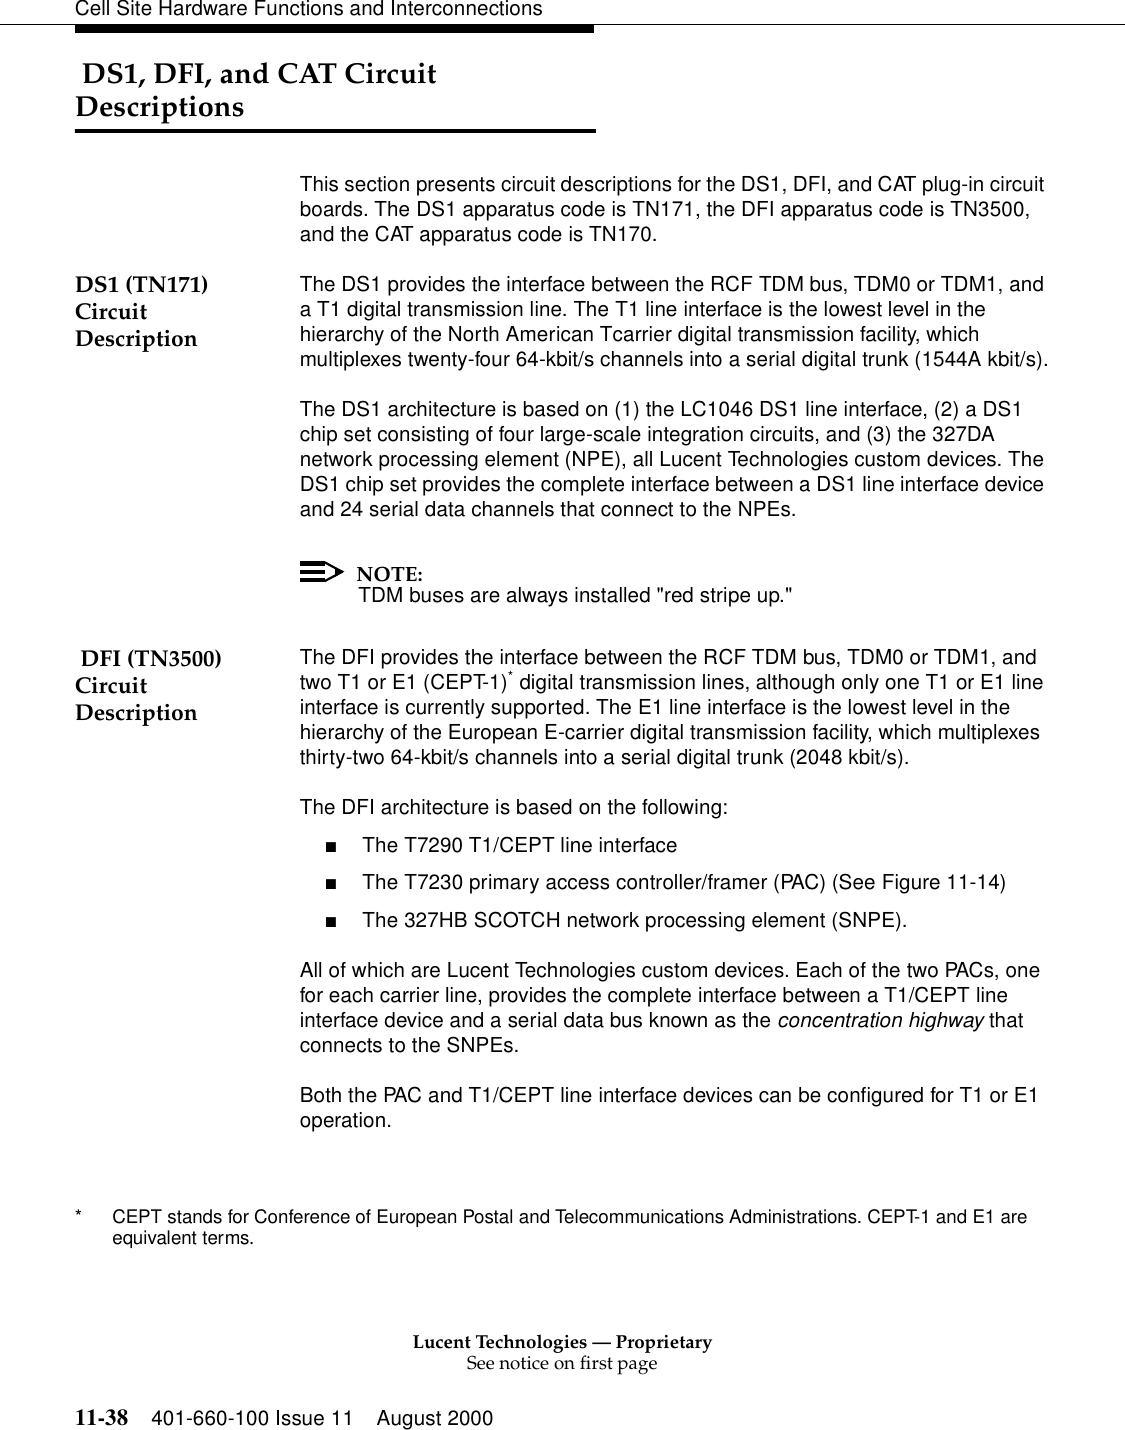 Lucent Technologies — ProprietarySee notice on first page11-38 401-660-100 Issue 11 August 2000Cell Site Hardware Functions and Interconnections DS1, DFI, and CAT Circuit DescriptionsThis section presents circuit descriptions for the DS1, DFI, and CAT plug-in circuit boards. The DS1 apparatus code is TN171, the DFI apparatus code is TN3500, and the CAT apparatus code is TN170.DS1 (TN171) Circuit DescriptionThe DS1 provides the interface between the RCF TDM bus, TDM0 or TDM1, and a T1 digital transmission line. The T1 line interface is the lowest level in the hierarchy of the North American Tcarrier digital transmission facility, which multiplexes twenty-four 64-kbit/s channels into a serial digital trunk (1544A kbit/s).The DS1 architecture is based on (1) the LC1046 DS1 line interface, (2) a DS1 chip set consisting of four large-scale integration circuits, and (3) the 327DA network processing element (NPE), all Lucent Technologies custom devices. The DS1 chip set provides the complete interface between a DS1 line interface device and 24 serial data channels that connect to the NPEs.NOTE:TDM buses are always installed &quot;red stripe up.&quot; DFI (TN3500) Circuit DescriptionThe DFI provides the interface between the RCF TDM bus, TDM0 or TDM1, and two T1 or E1 (CEPT-1)* digital transmission lines, although only one T1 or E1 line interface is currently supported. The E1 line interface is the lowest level in the hierarchy of the European E-carrier digital transmission facility, which multiplexes thirty-two 64-kbit/s channels into a serial digital trunk (2048 kbit/s).The DFI architecture is based on the following:■The T7290 T1/CEPT line interface■The T7230 primary access controller/framer (PAC) (See Figure 11-14)■The 327HB SCOTCH network processing element (SNPE).All of which are Lucent Technologies custom devices. Each of the two PACs, one for each carrier line, provides the complete interface between a T1/CEPT line interface device and a serial data bus known as the concentration highway that connects to the SNPEs.Both the PAC and T1/CEPT line interface devices can be configured for T1 or E1 operation.* CEPT stands for Conference of European Postal and Telecommunications Administrations. CEPT-1 and E1 are equivalent terms.